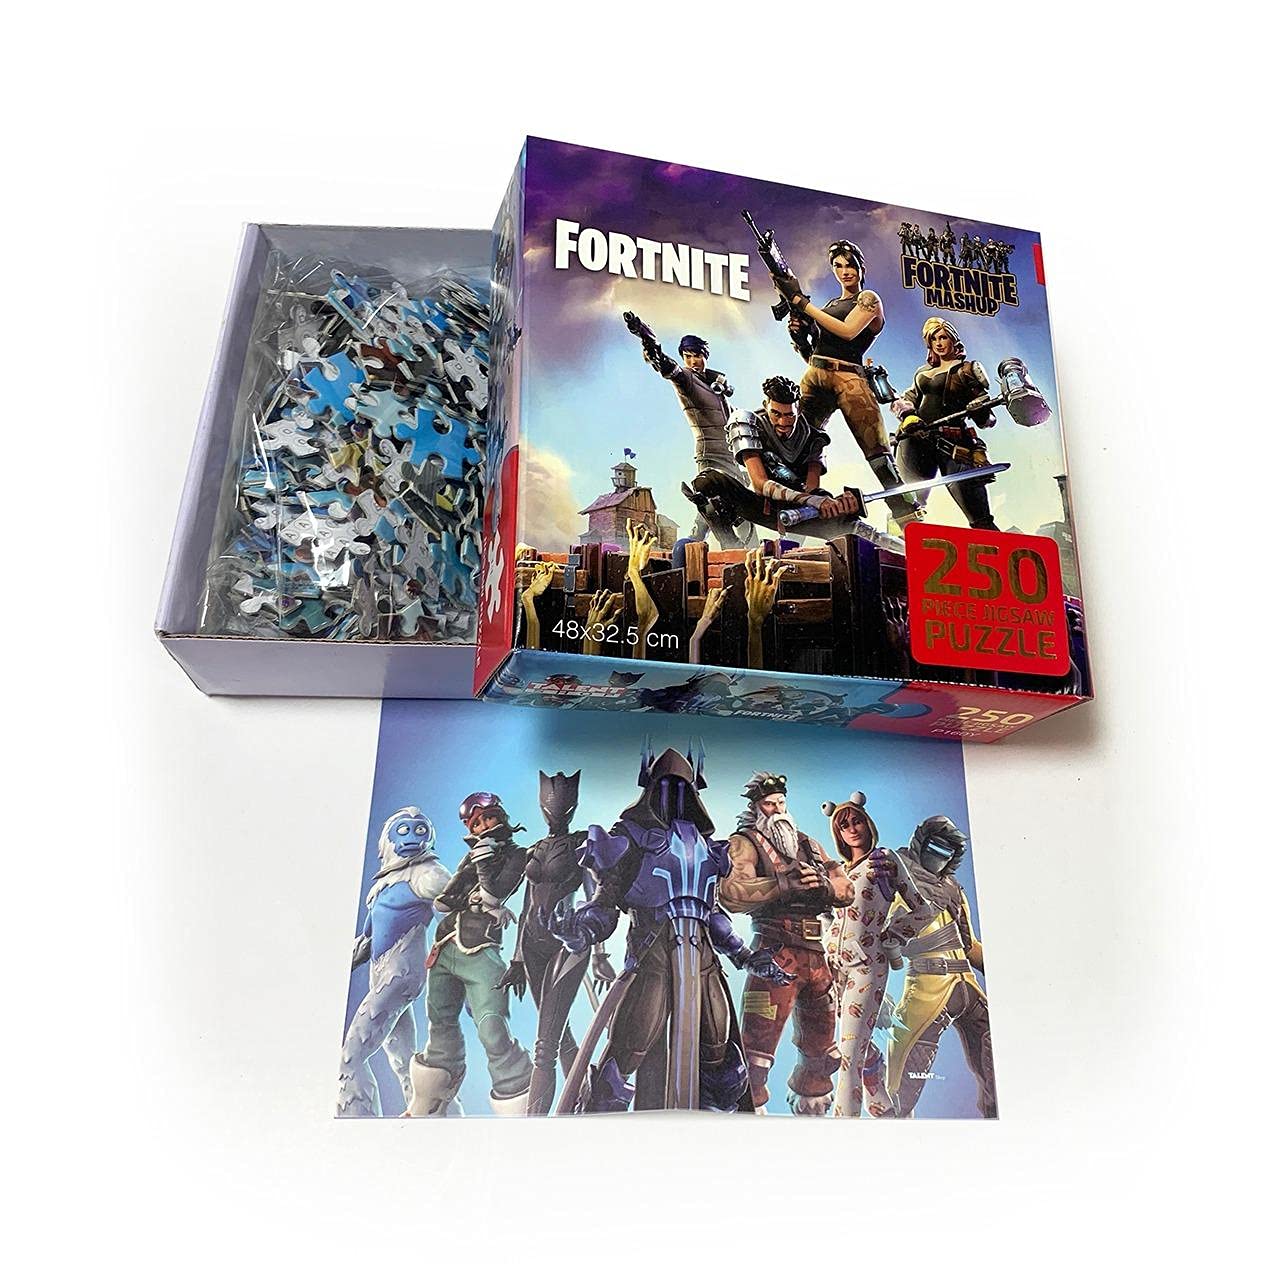 Fortnite Jigsaw Puzzle 250 pieces